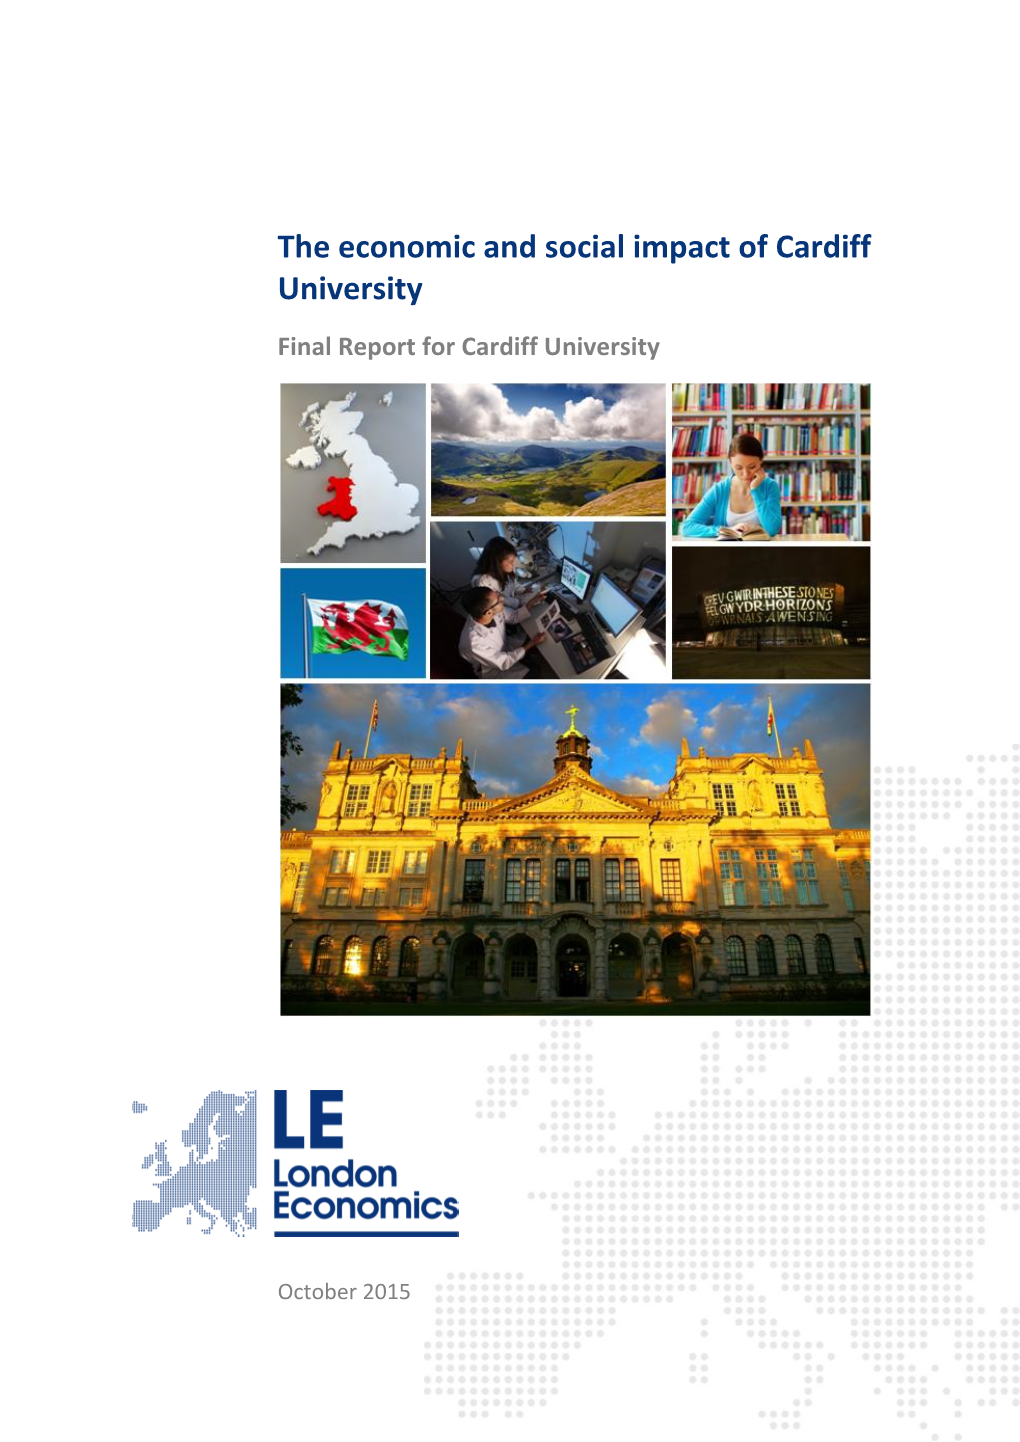 The Economic and Social Impact of Cardiff University Final Report for Cardiff University